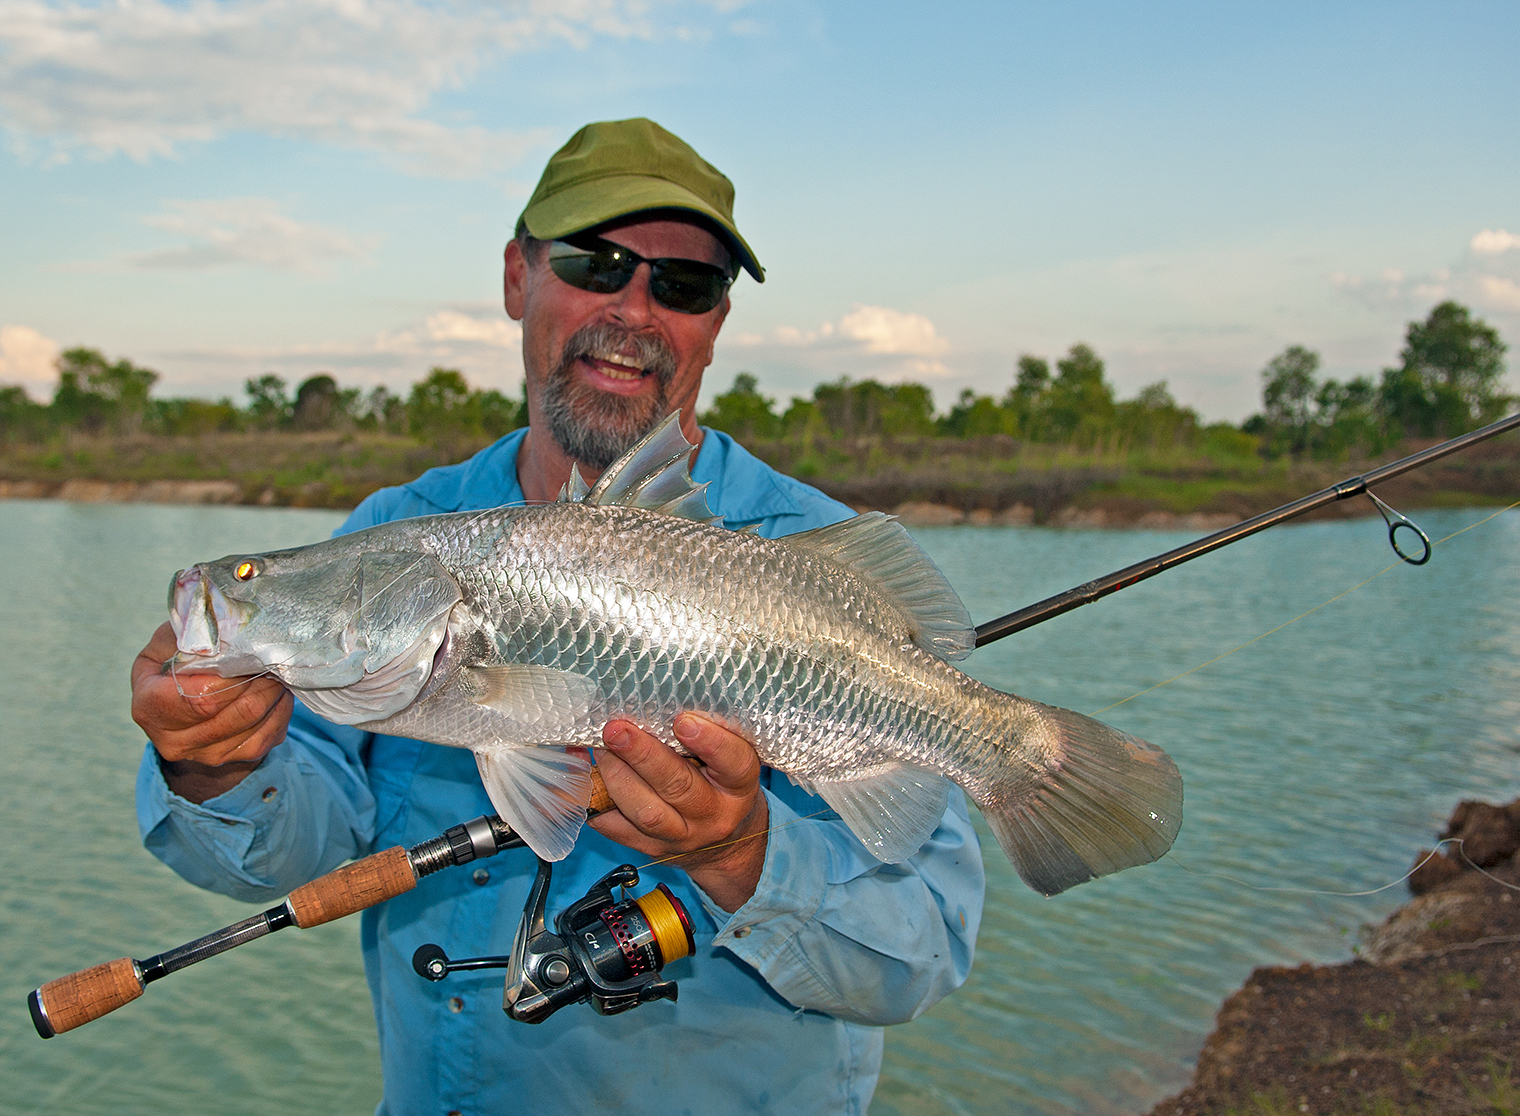 Every angler who visits the Top End wants to catch a barra, but it's not always that easy, especially without a boat!